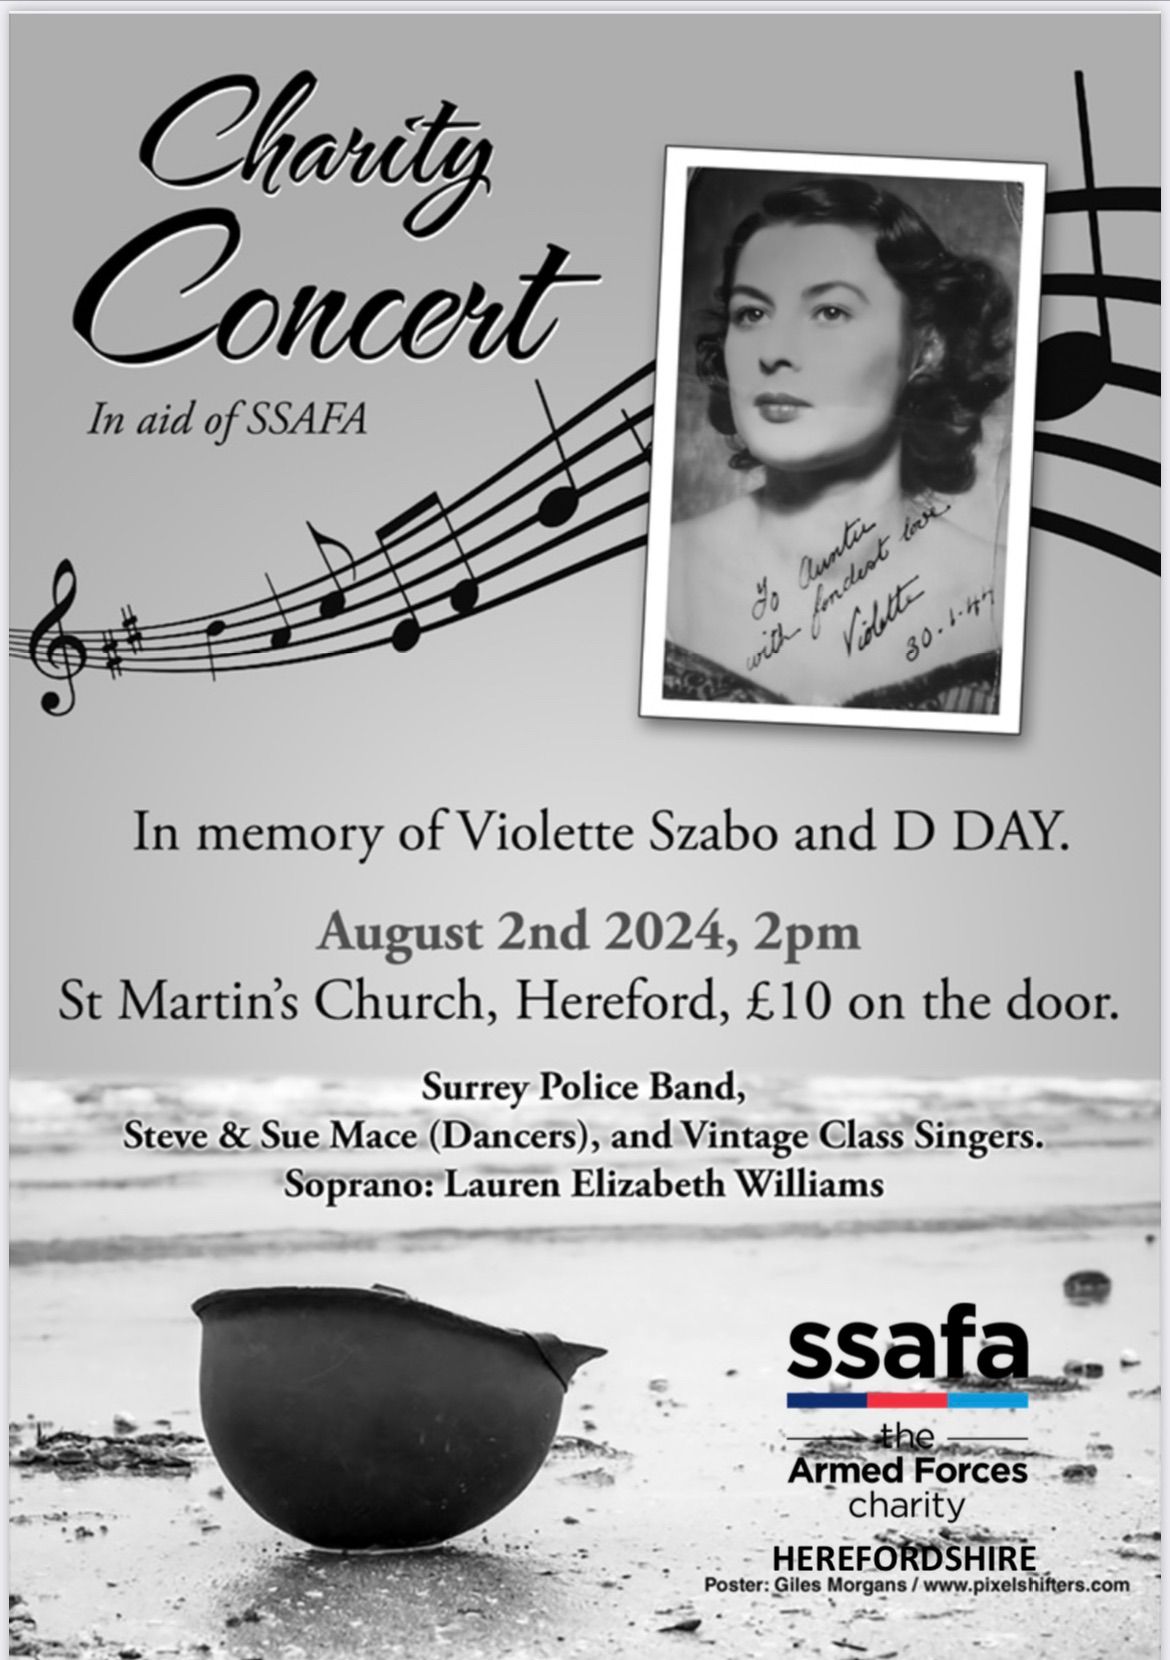 Charity Concert in aid of SSAFA, Herefordshire